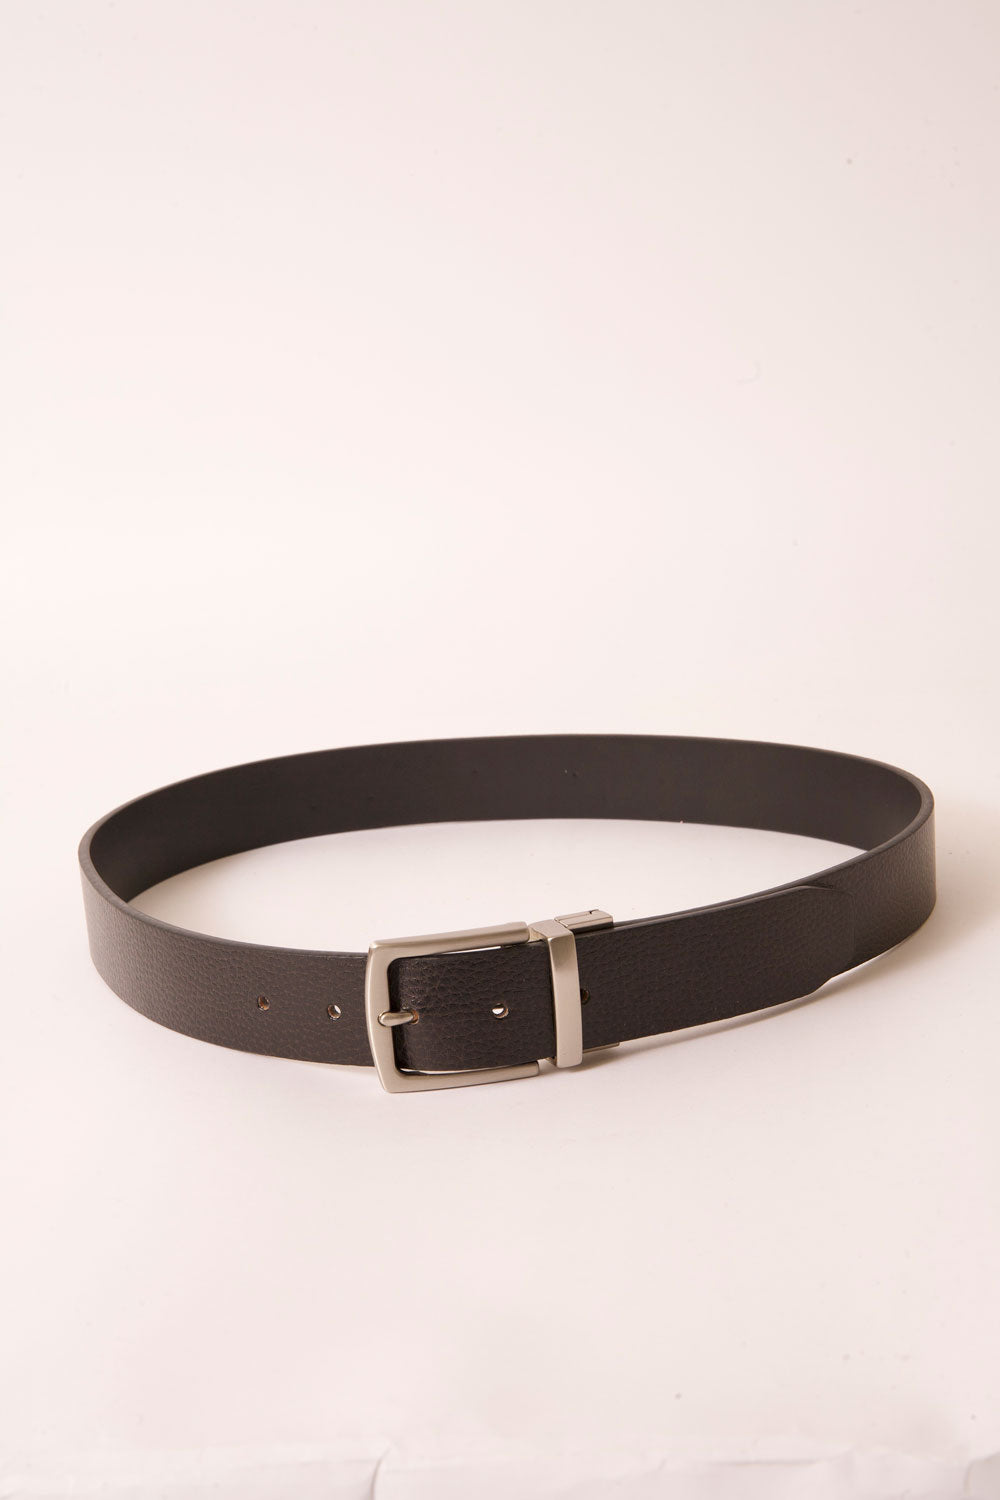 black reversible belt by american hat makers front view